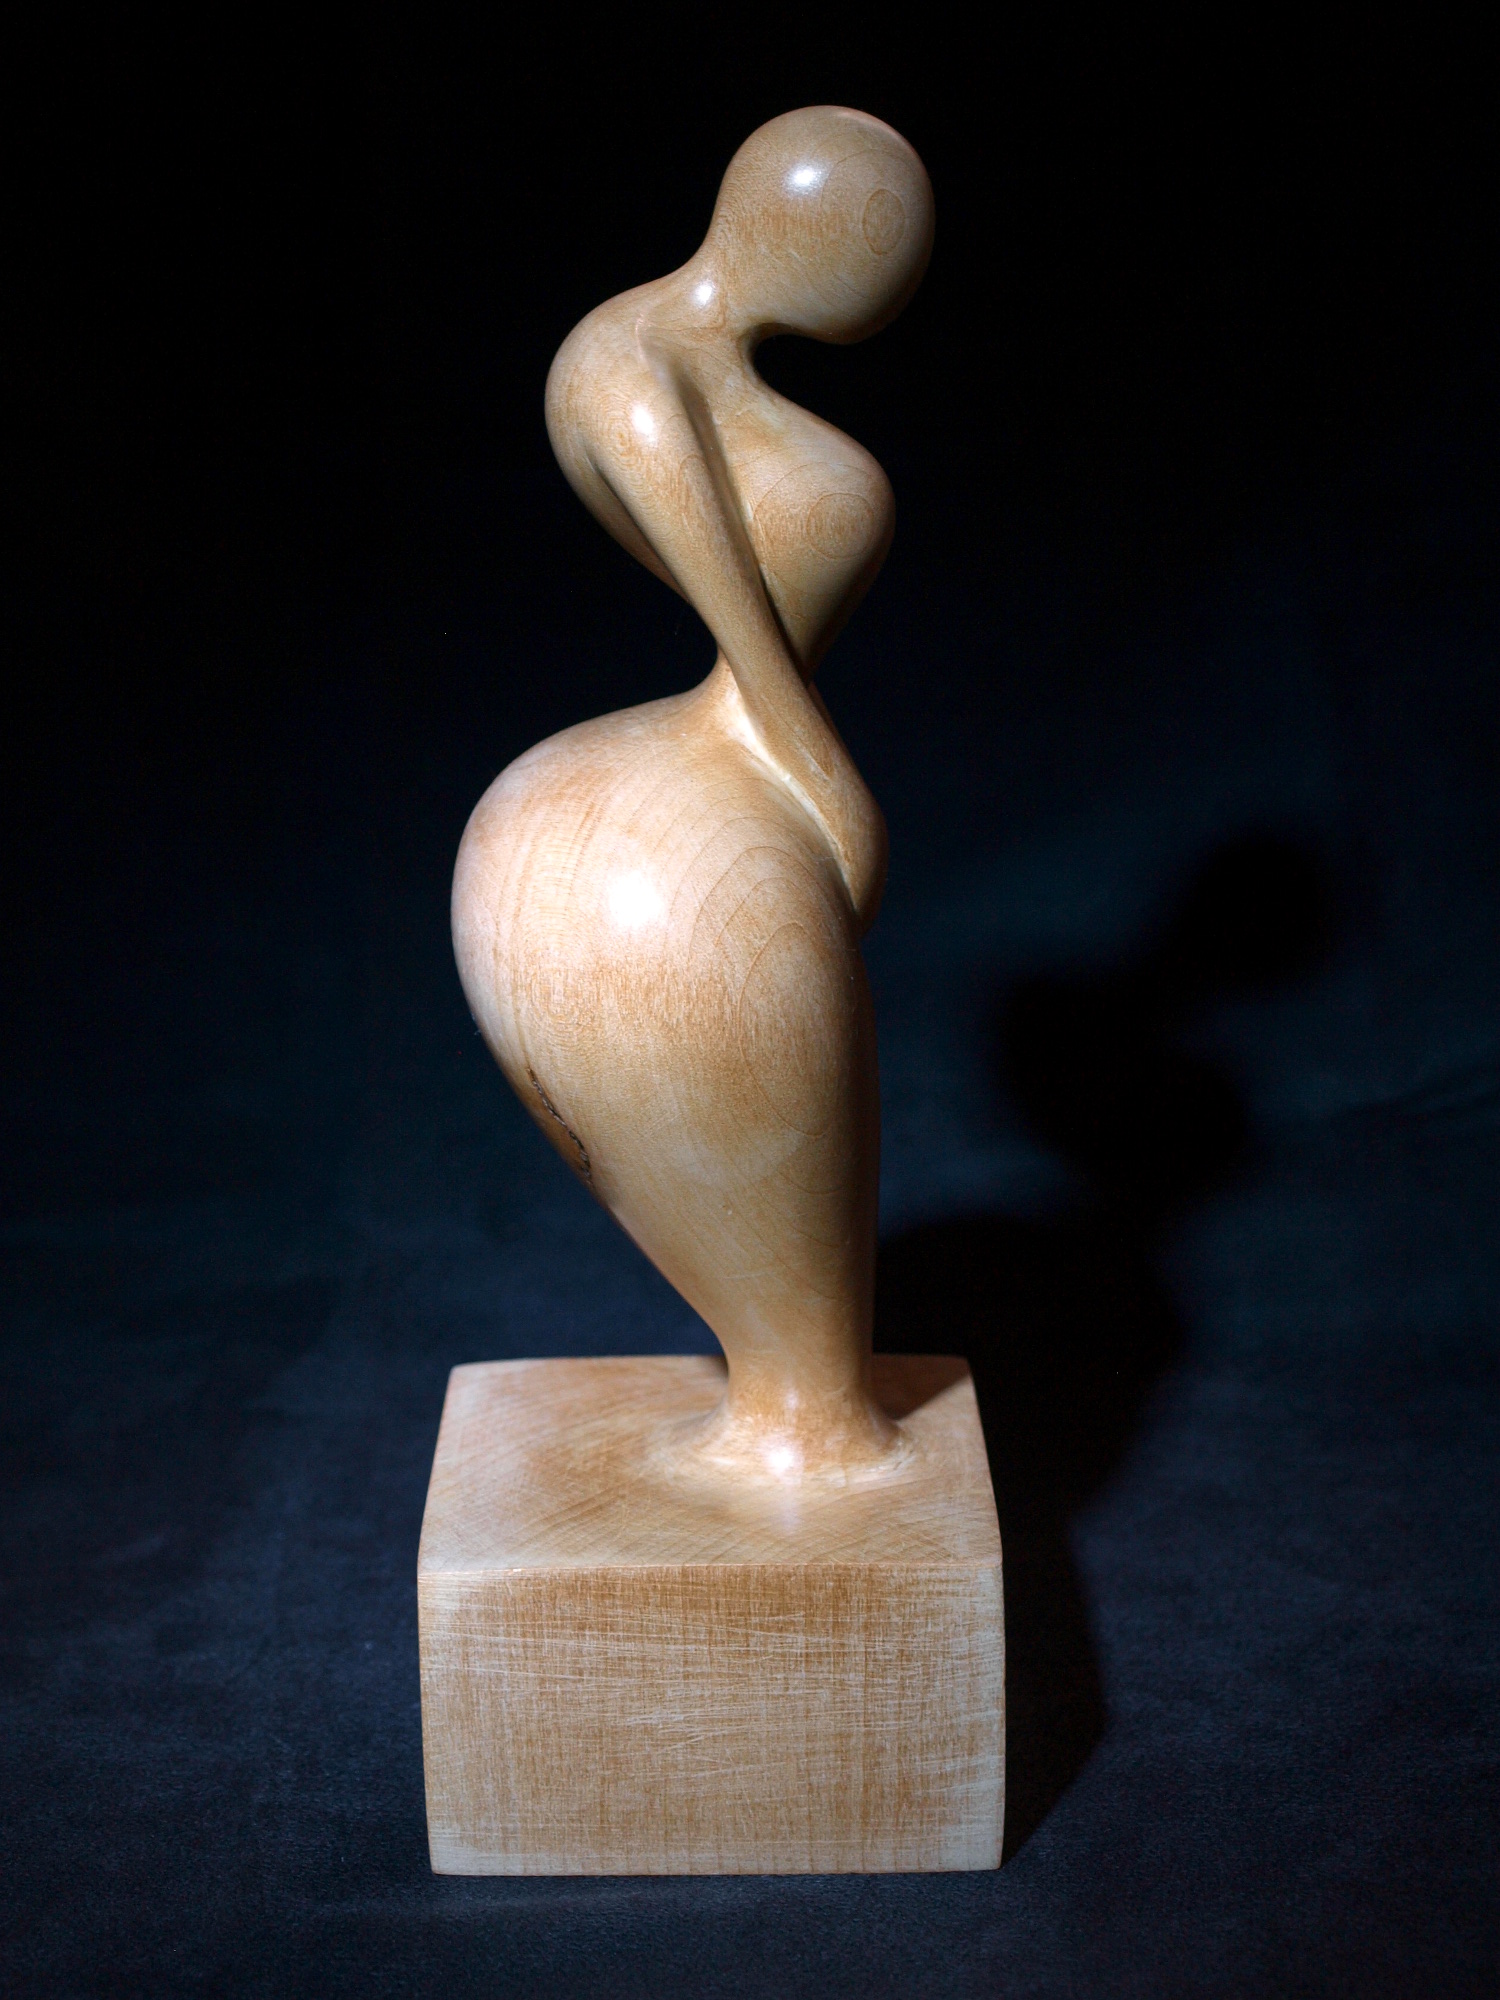 Curved_Idol (side view)